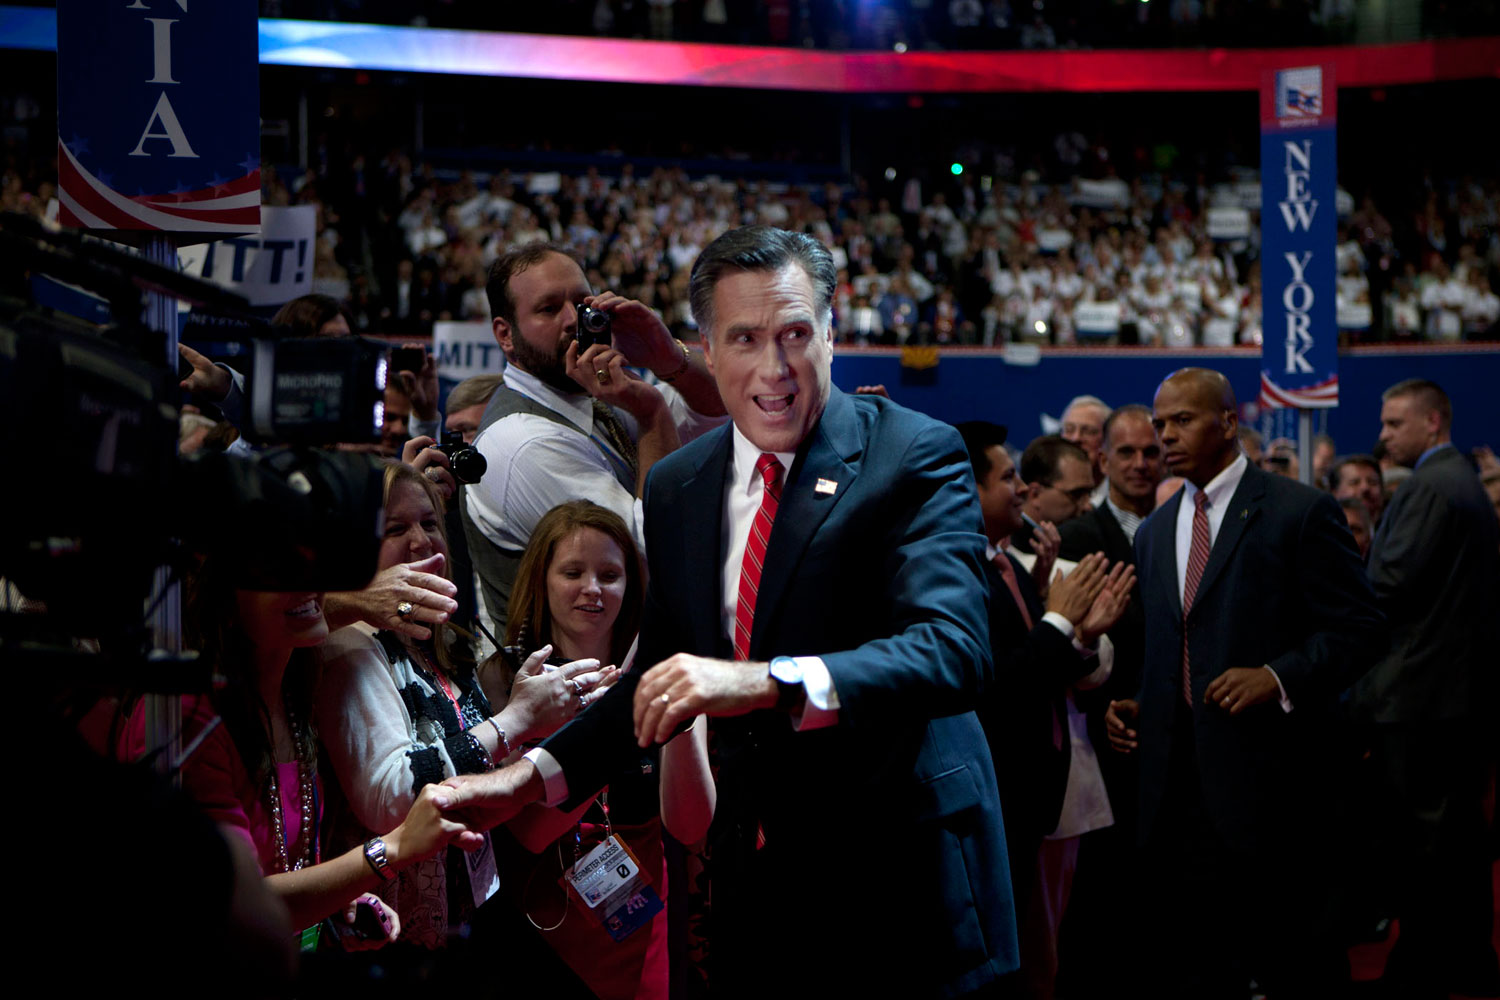 Image: Republican presidential candidate Mitt Romney is seen on the final night of the Republican National Convention in Tampa. Aug. 30, 2012.